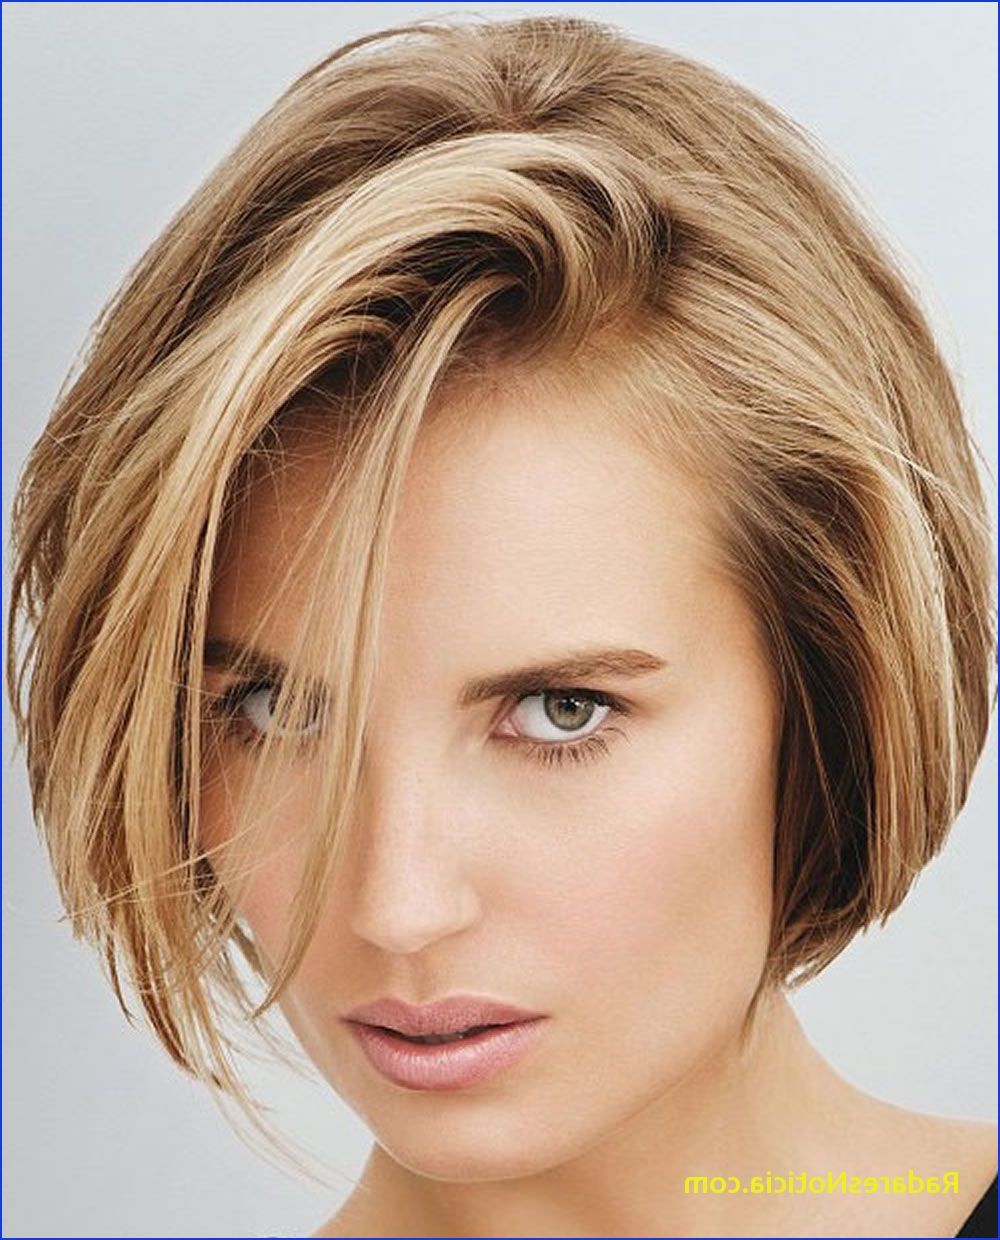 Long Bob With Bangs 2018 31 Chic Short Haircut Ideas 2018 & Pixie For Chic Short Hair Cuts (View 10 of 25)